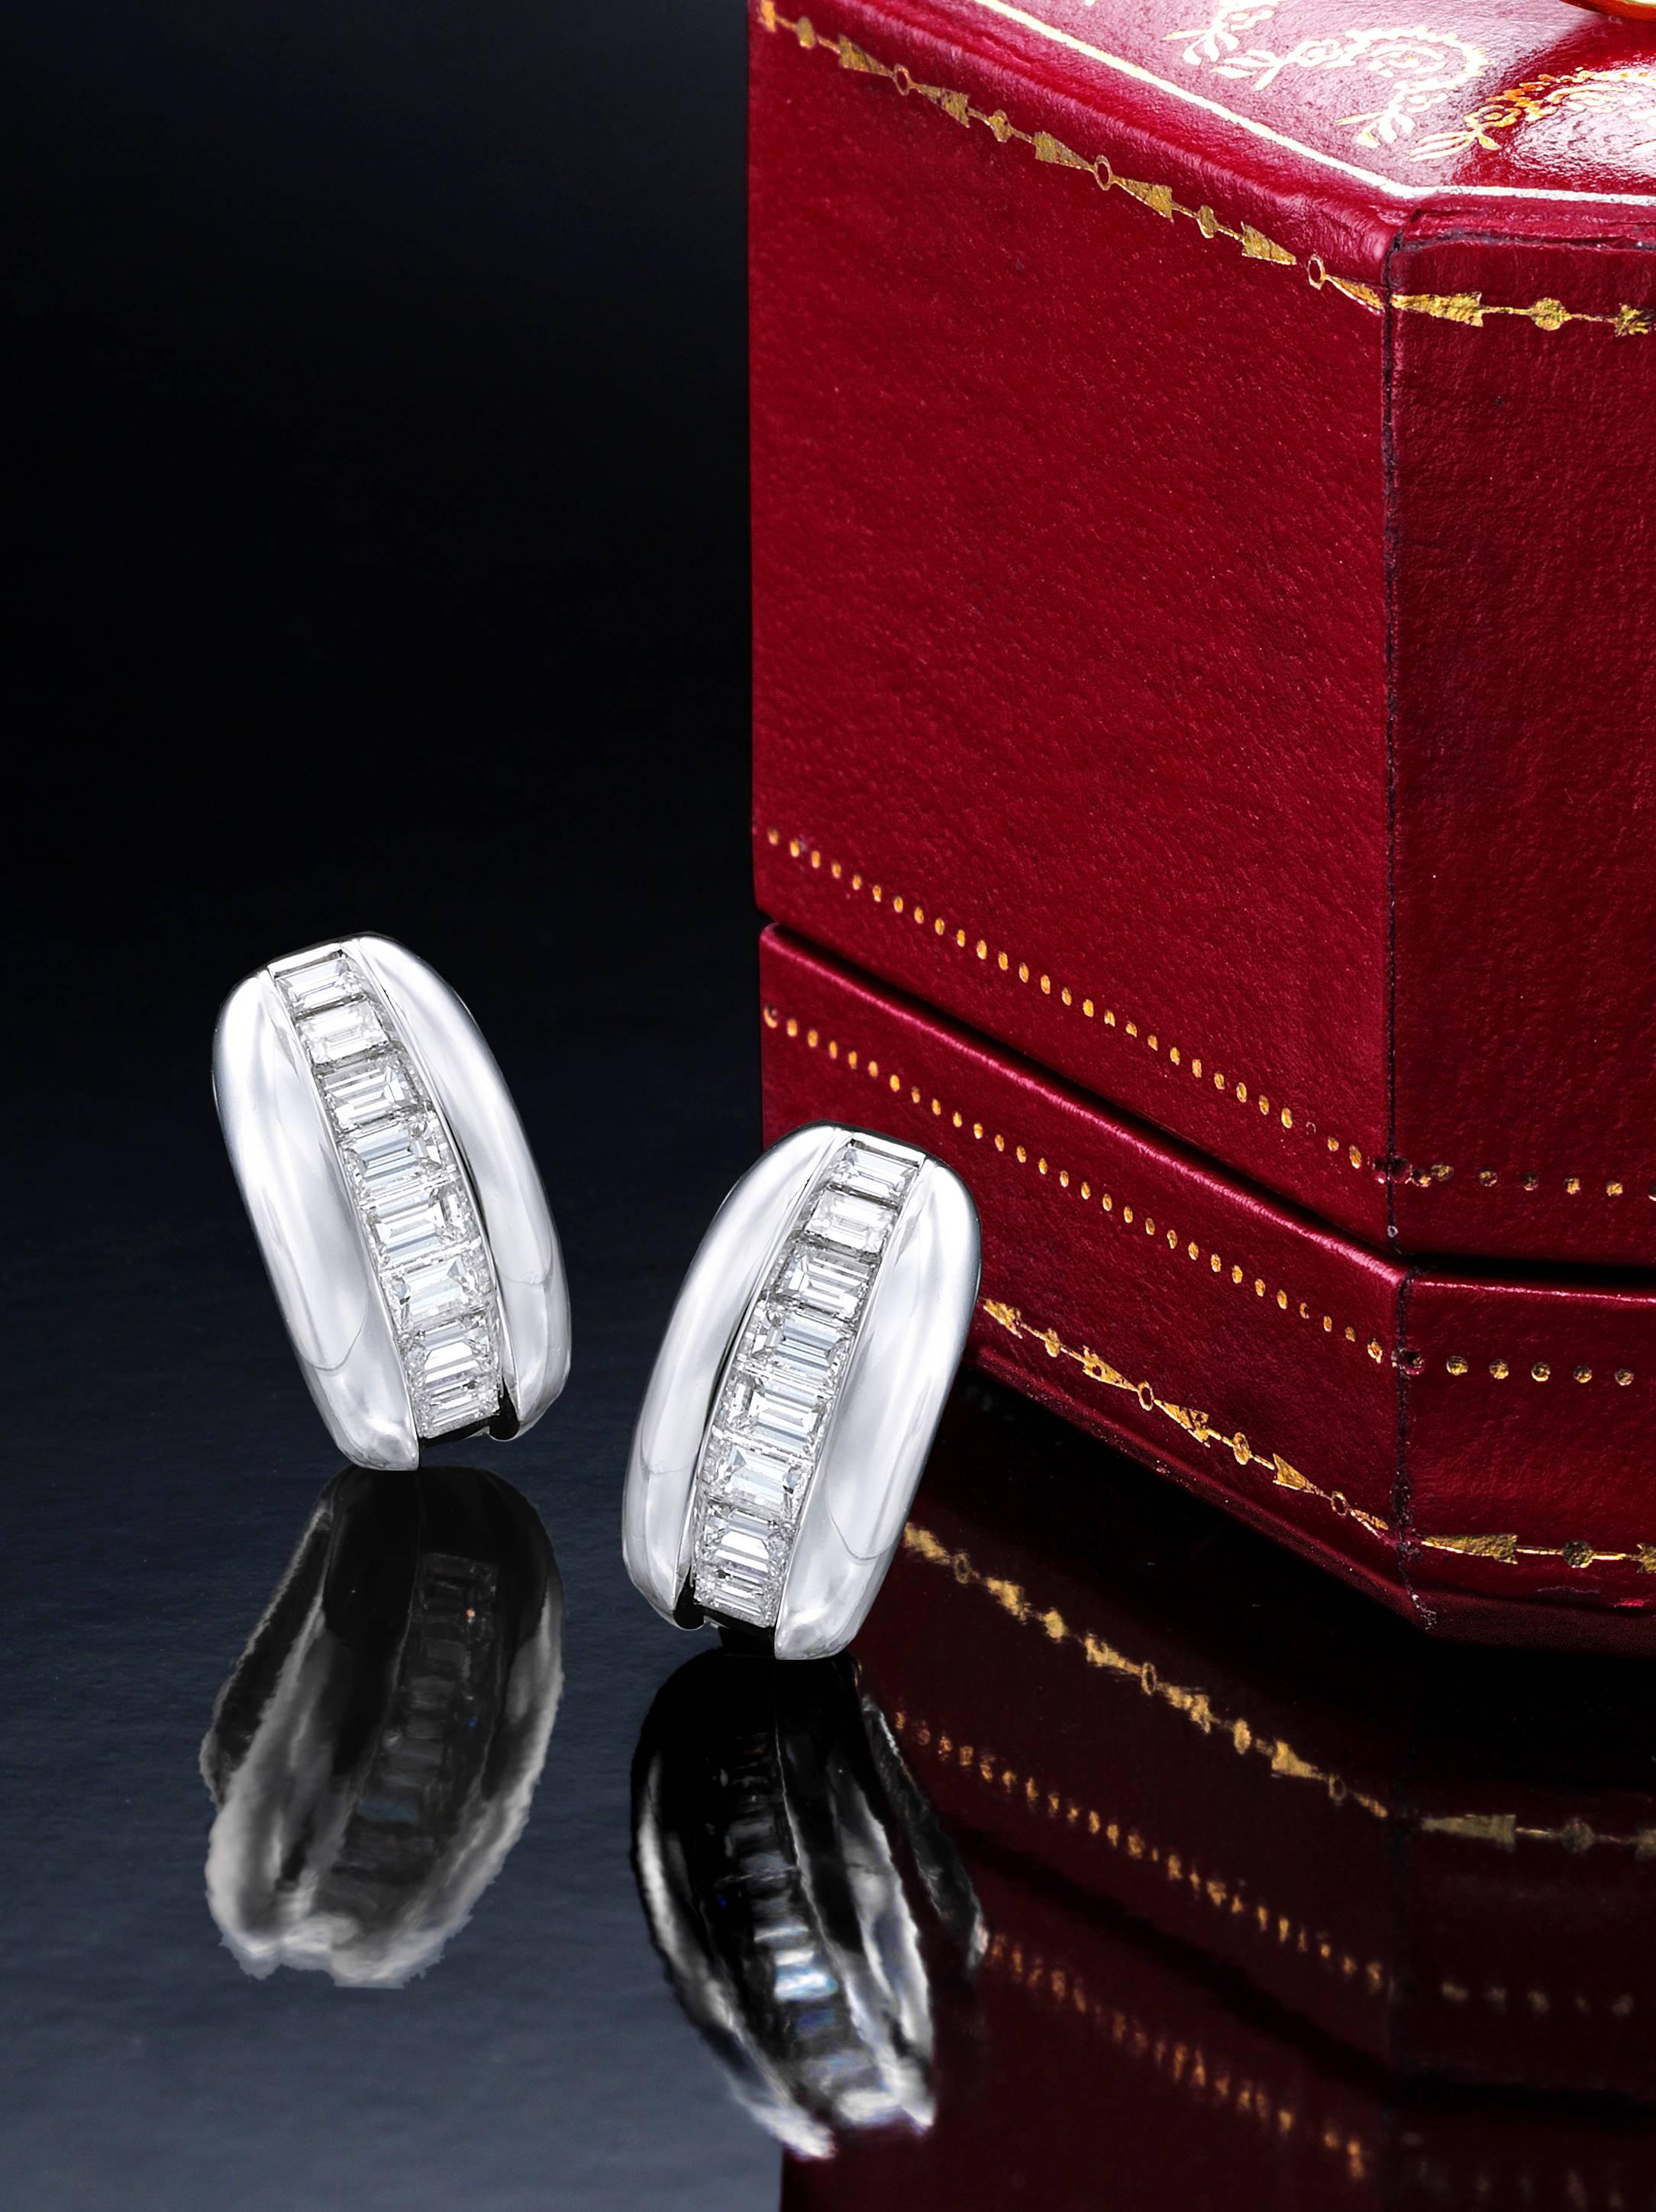 Sleek diamond ear clips by the world famous house of Cartier.   Made circa 1960, accompanied in their original fitted box, these earrings possess approximately 3.0 cts of fine white baguette cut diamonds.  These 18K earrings measure approximately